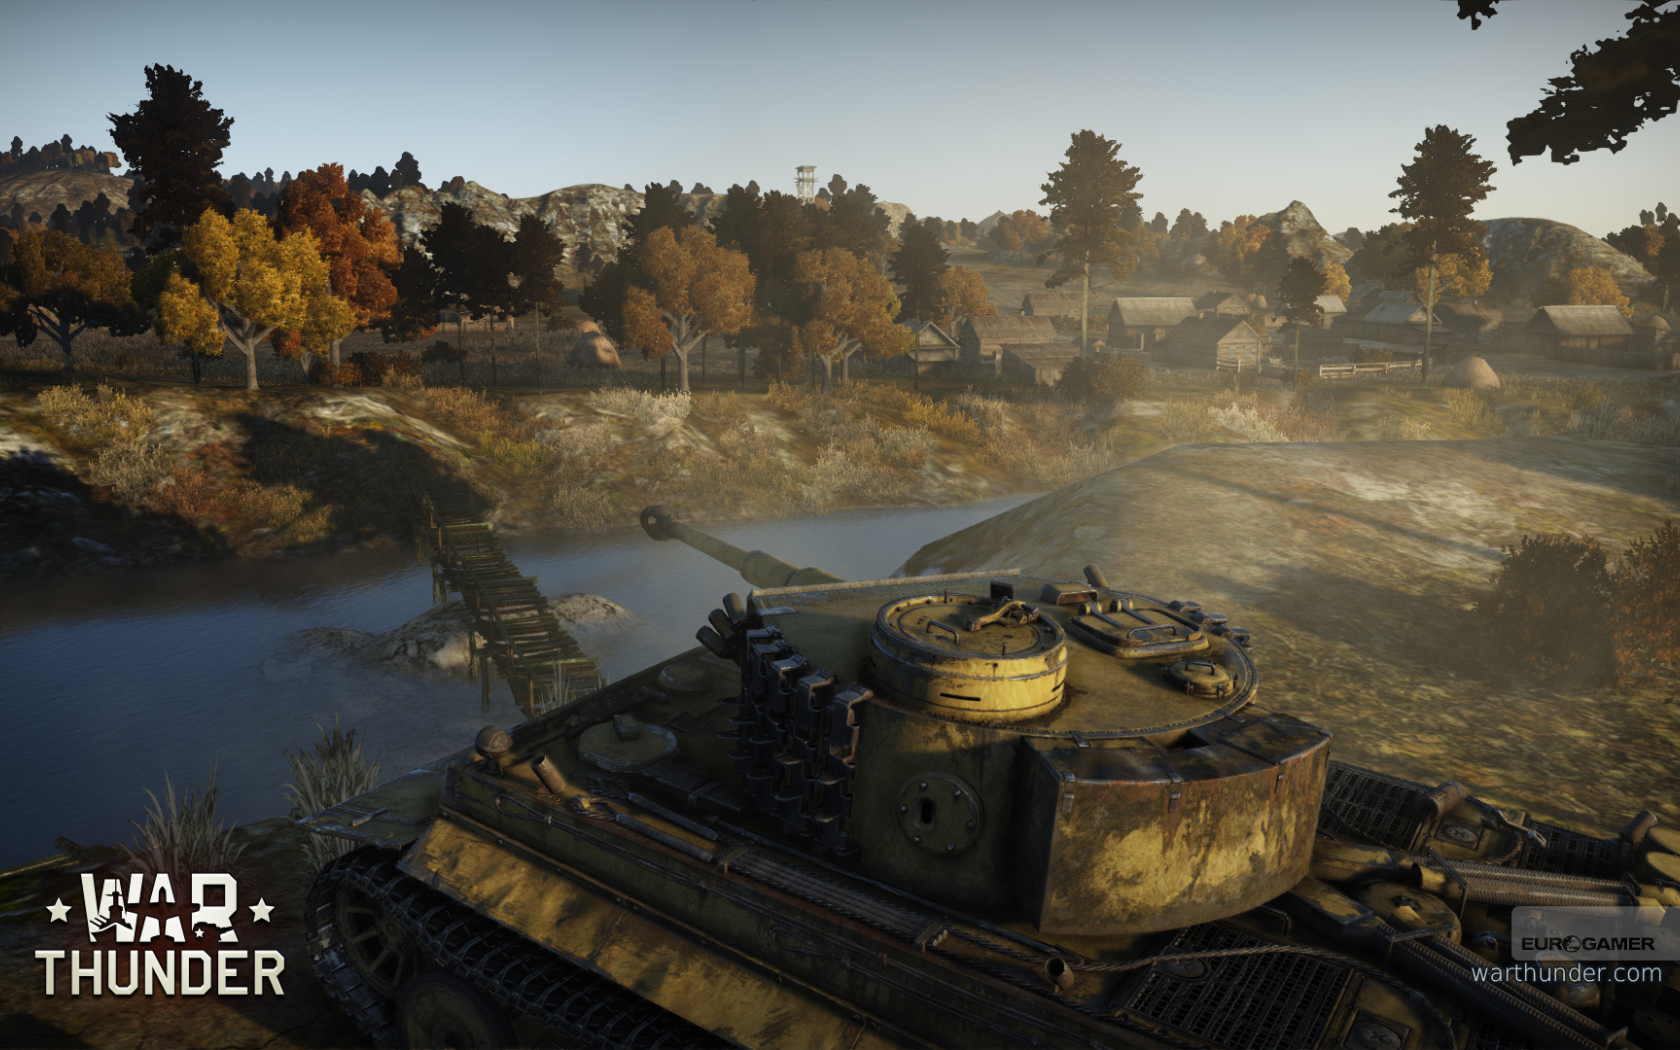 War Thunder tank is holding position